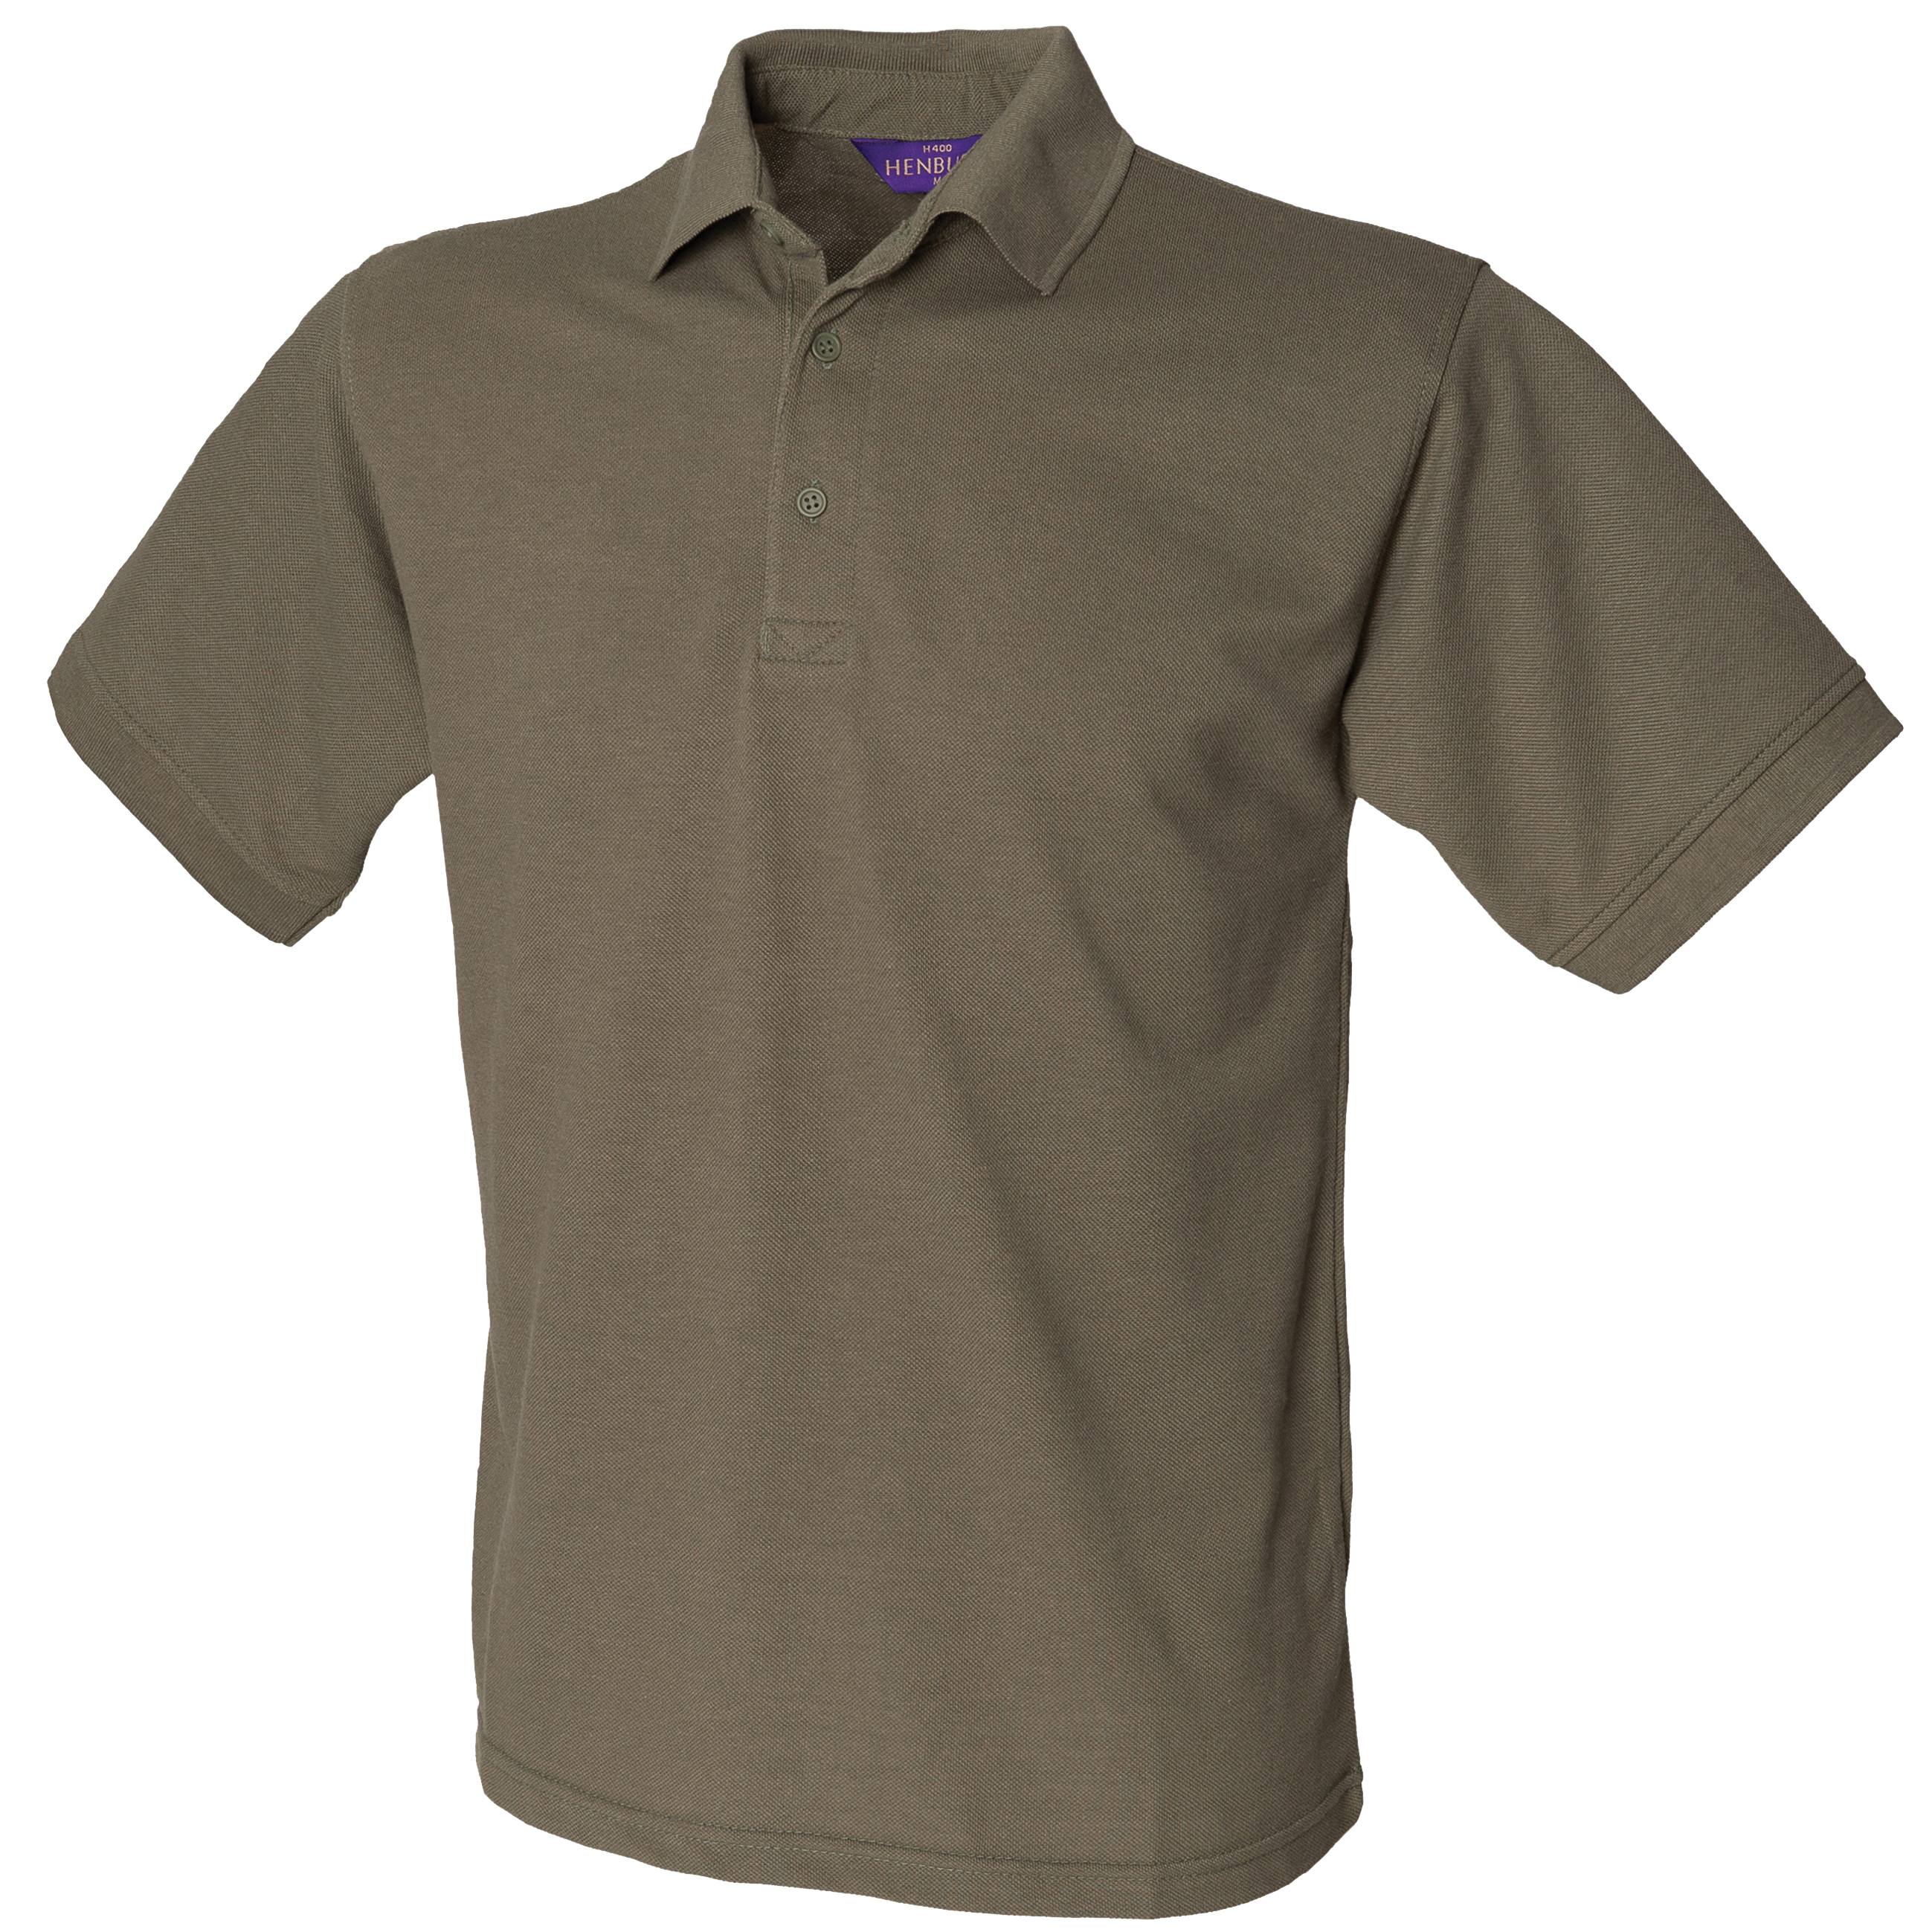 ax-httpswebsystems.s3.amazonaws.comtmp_for_downloadhenbury-65-35-classic-pique-polo-shirt-olive.jpg